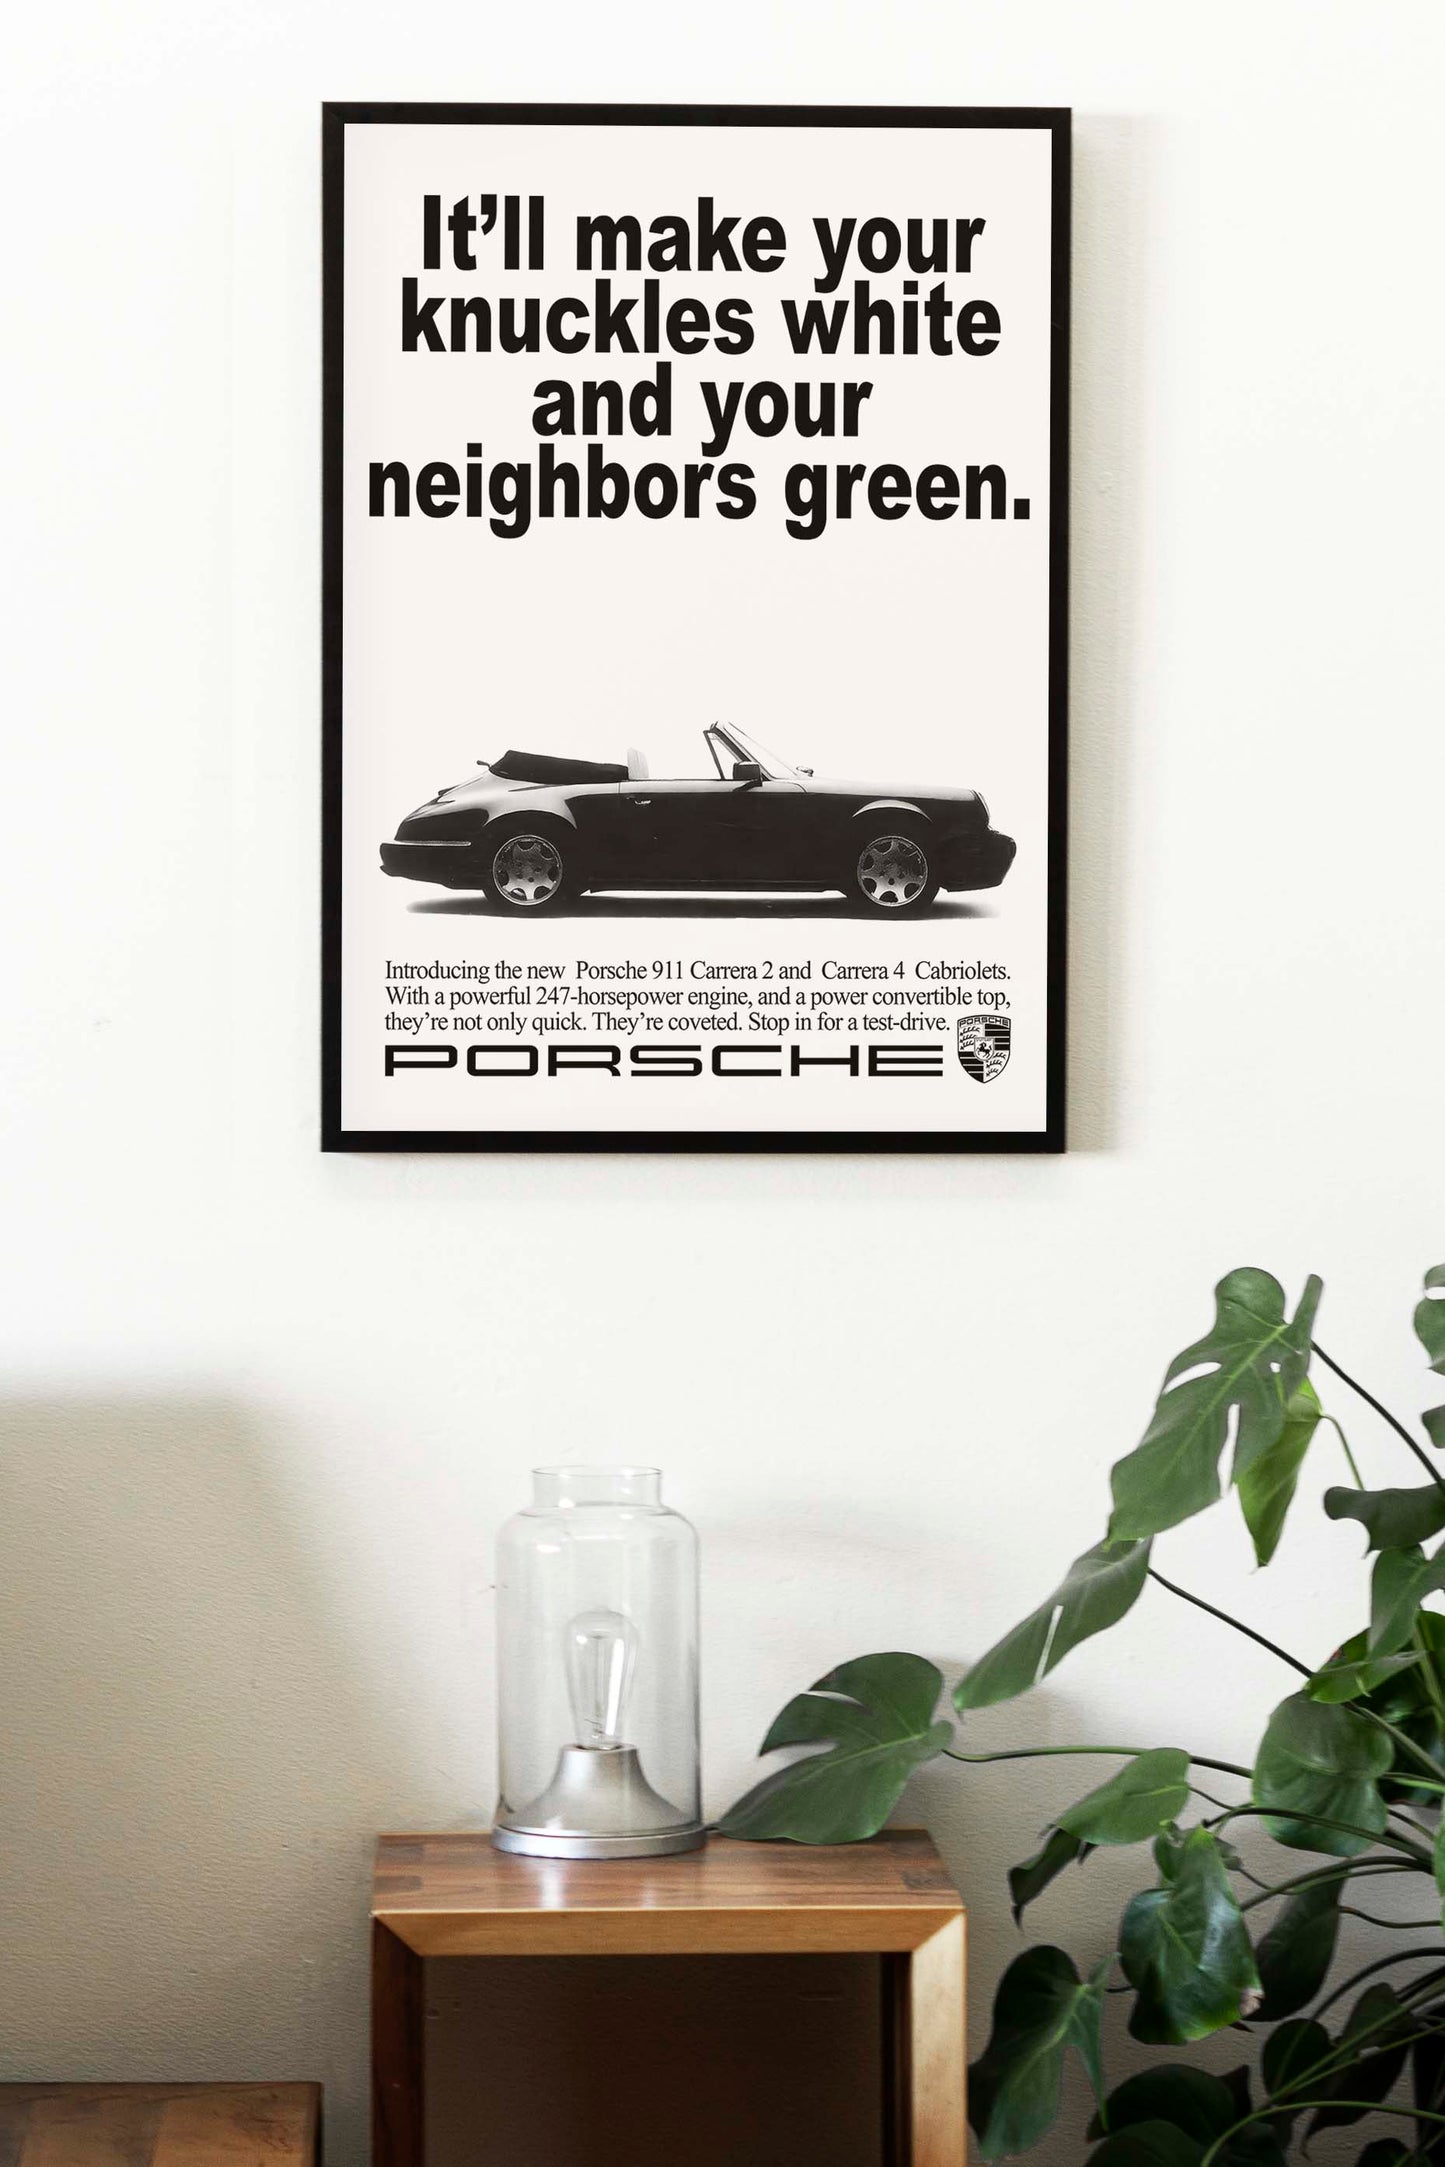 Porsche "It'll Make Your Knuckles White And Your Neighbors Green" Poster